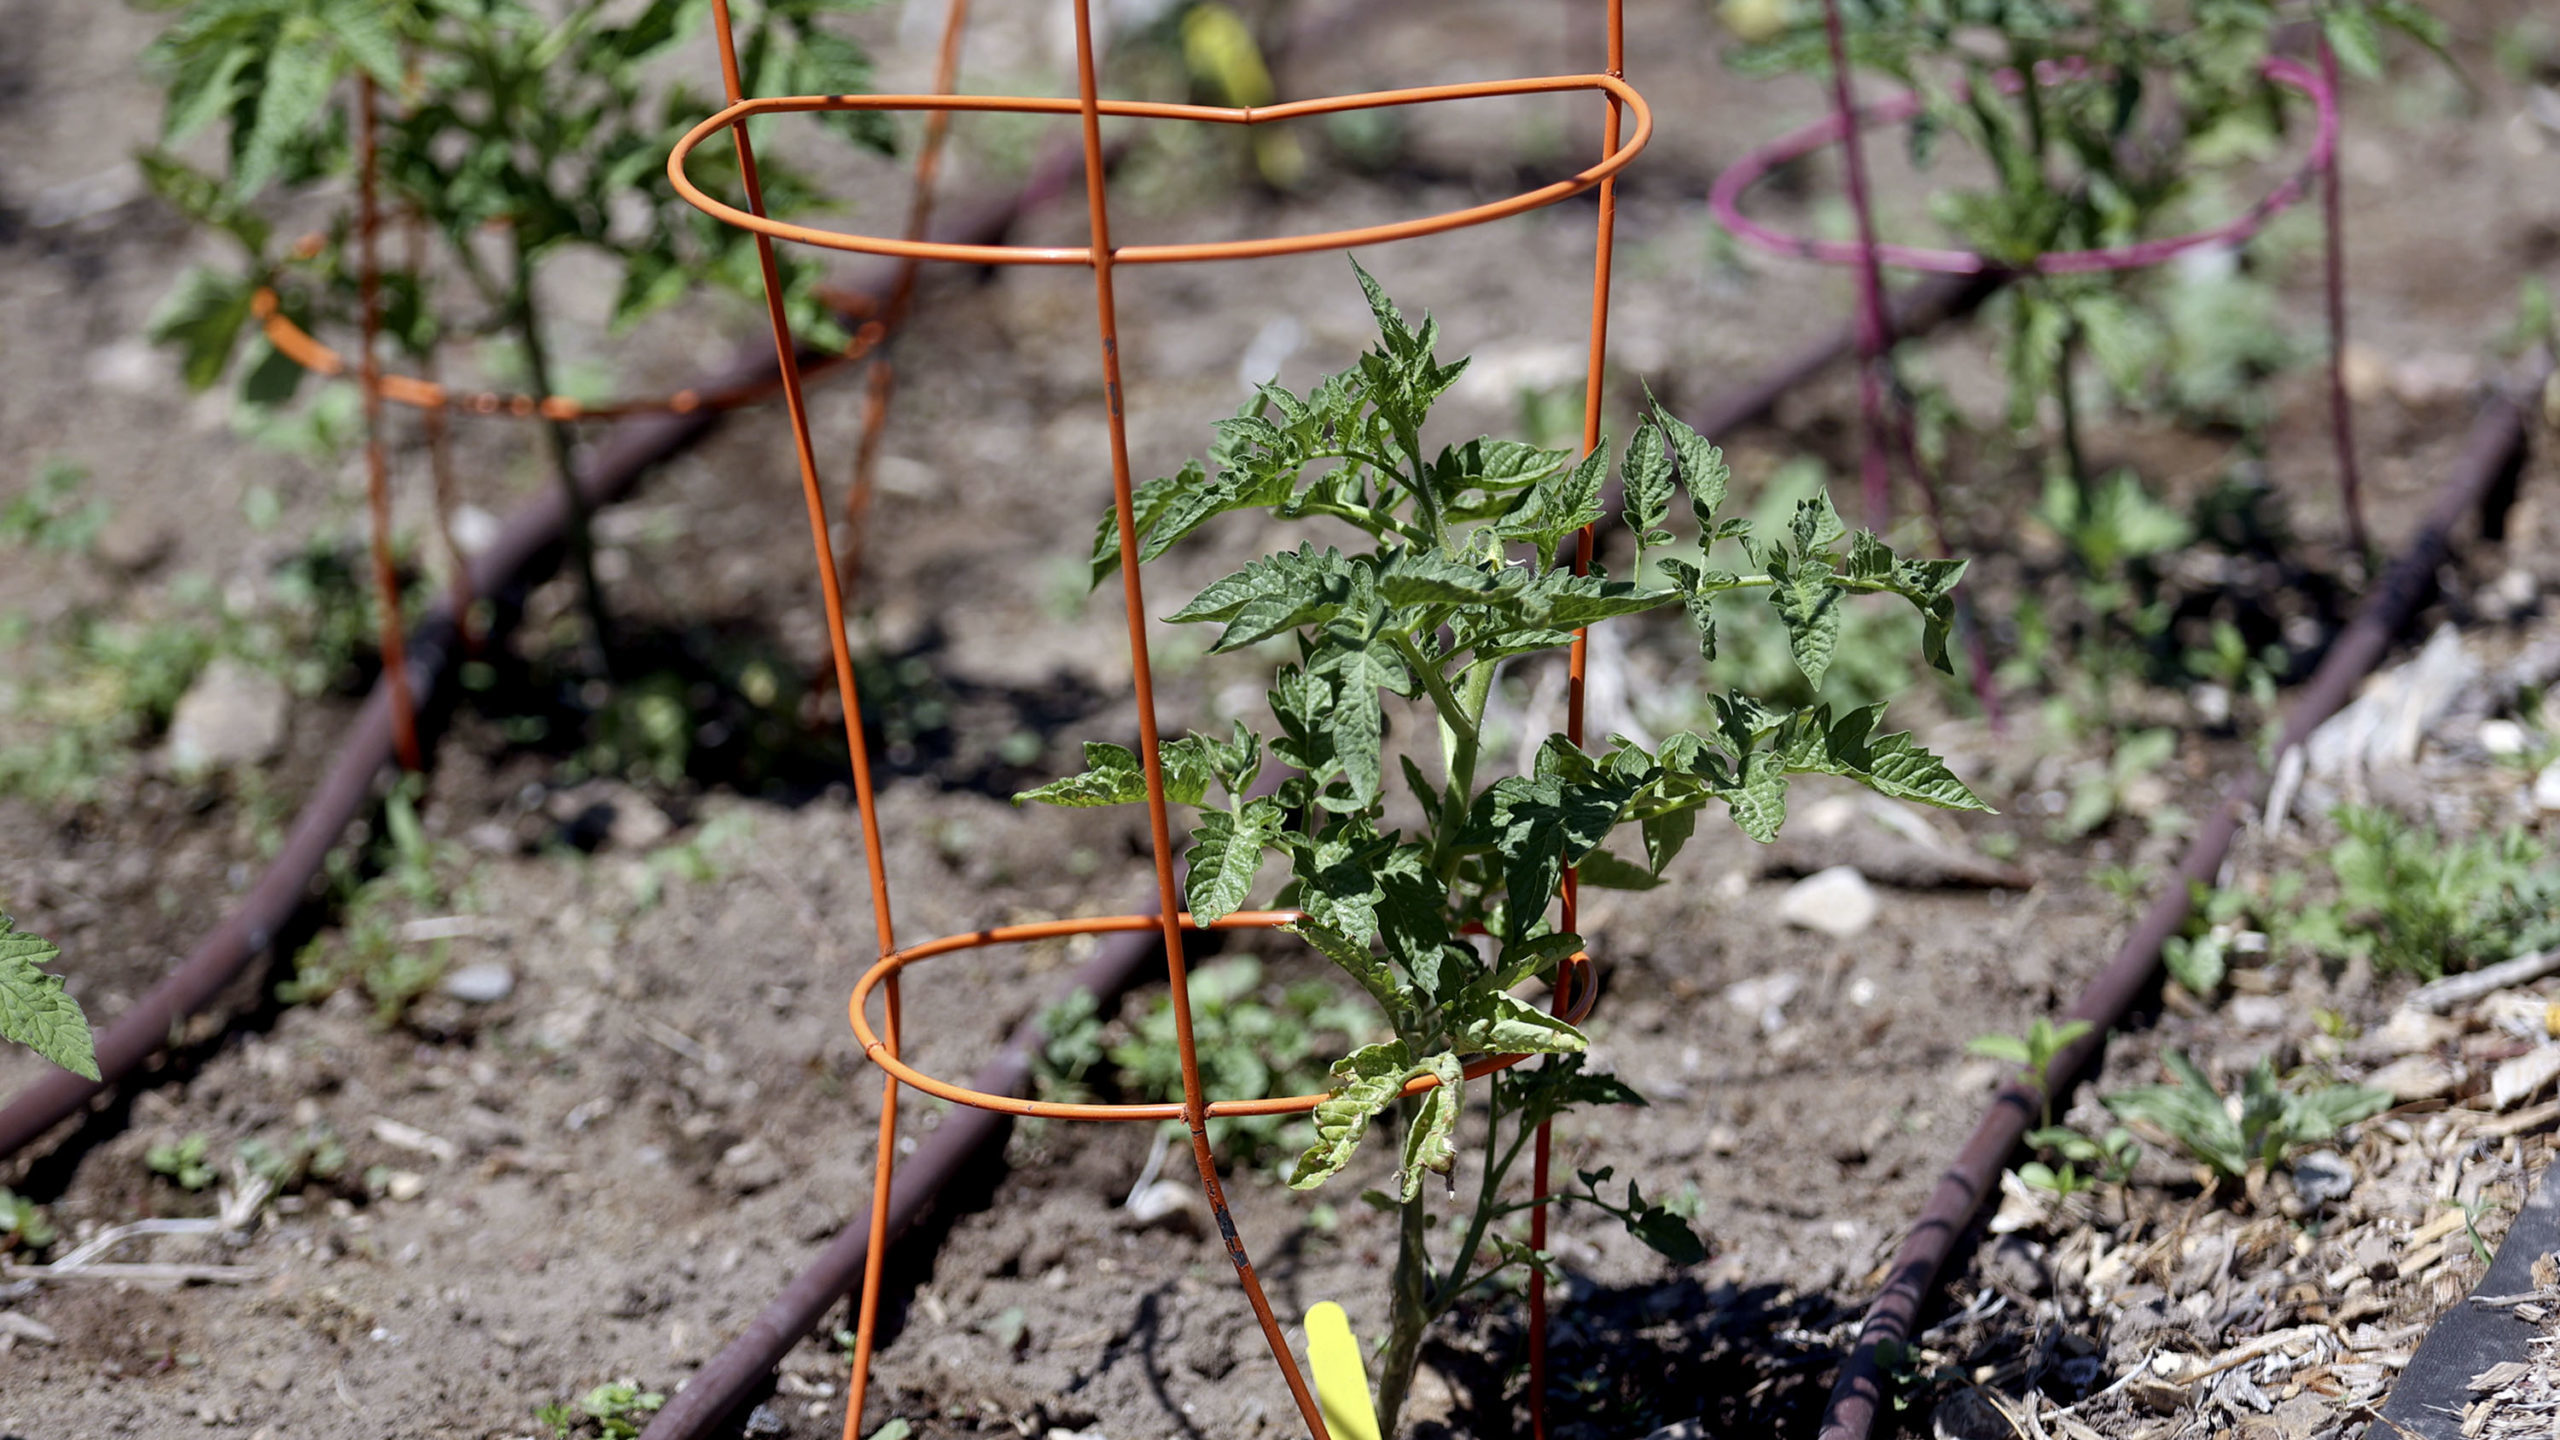 a plant in a community gardens in utah is pictured...